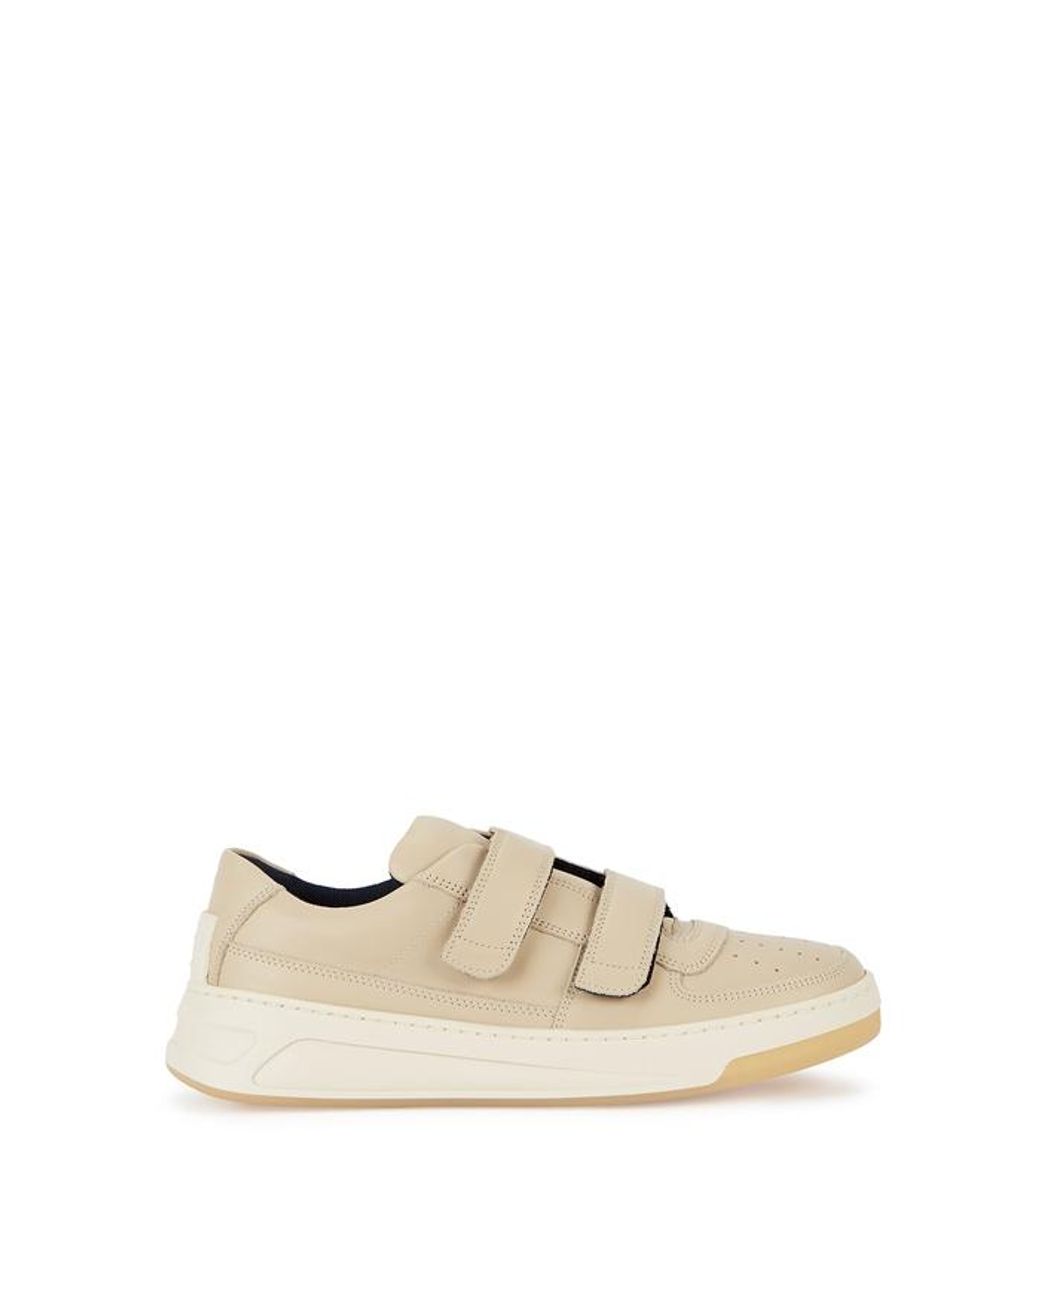 Acne Studios Steffey Sand Leather Sneakers in Natural | Lyst